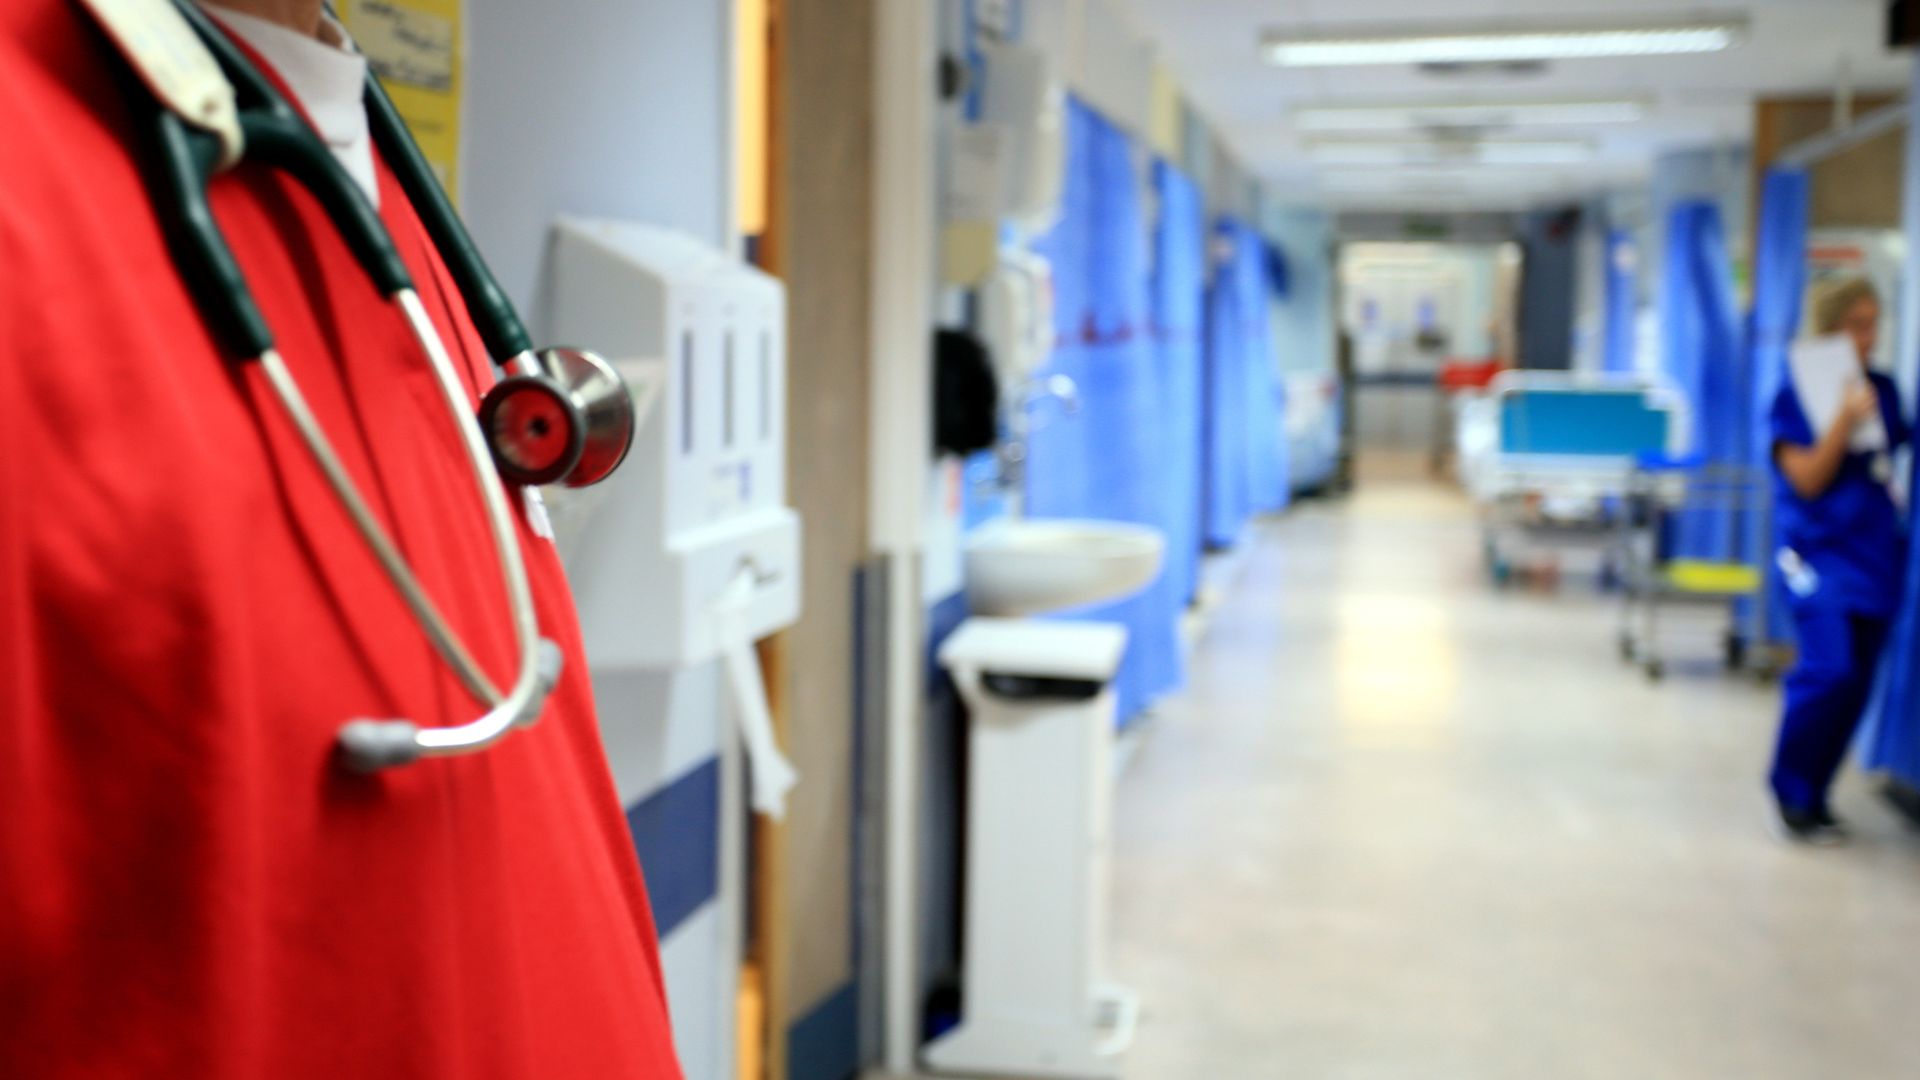 Labour pledges to clear backlog of patients waiting over 18 weeks within five years...